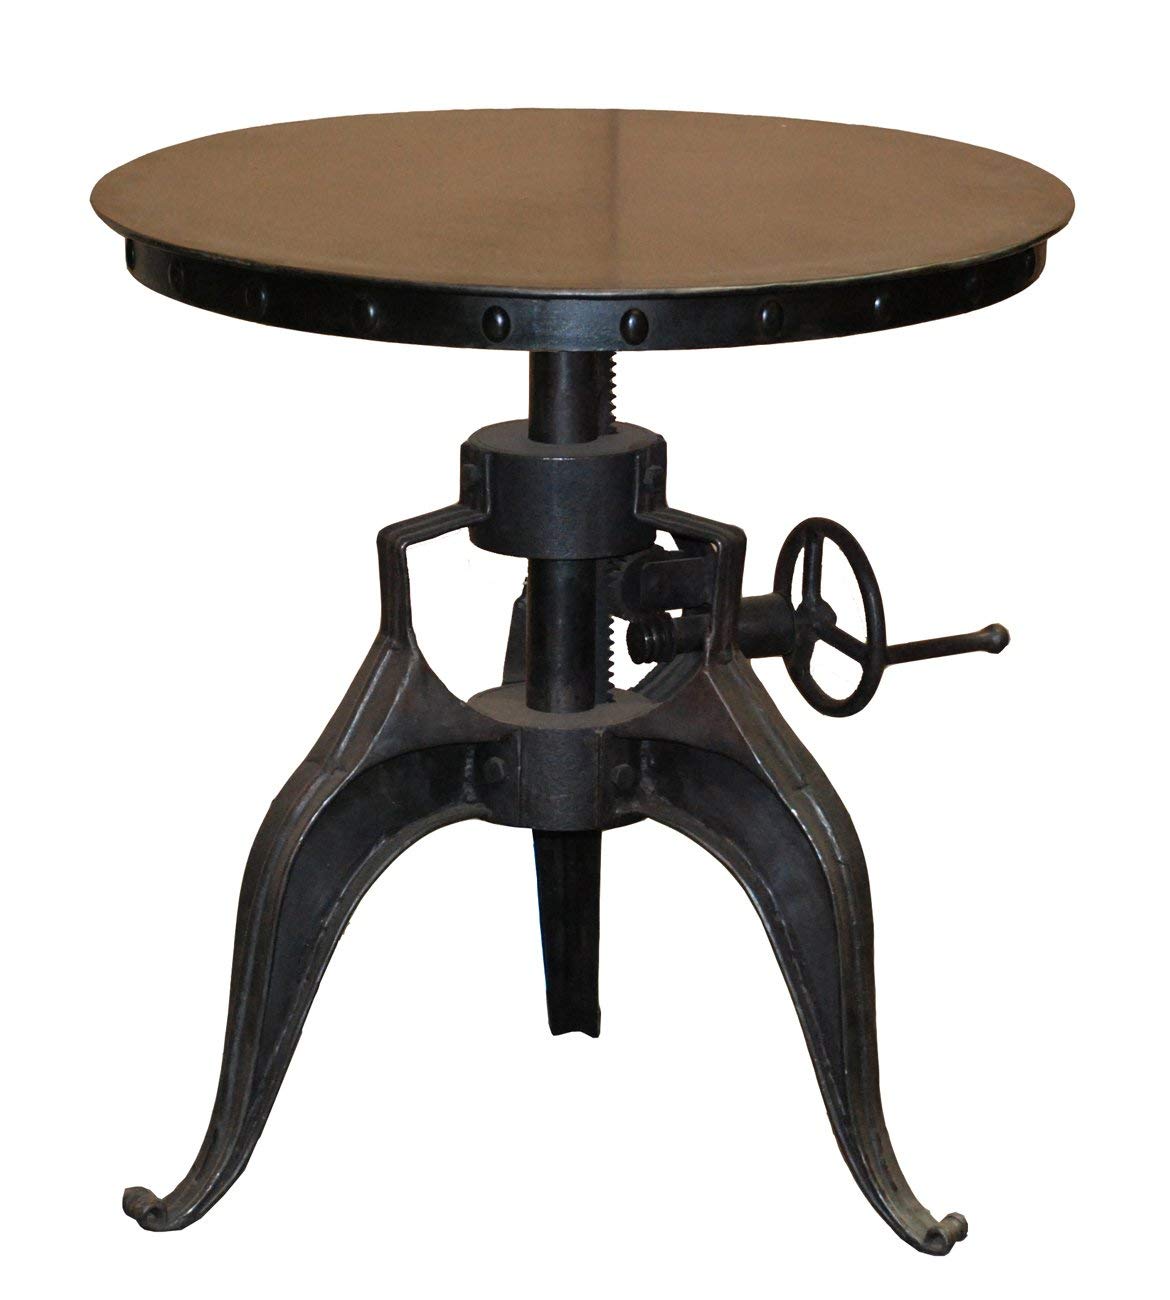 rustic industrial style round iron metal accent table with den end tables very small nightstand pedestal side glass kitchen set noguchi kohls rewards number big dog houses ashley